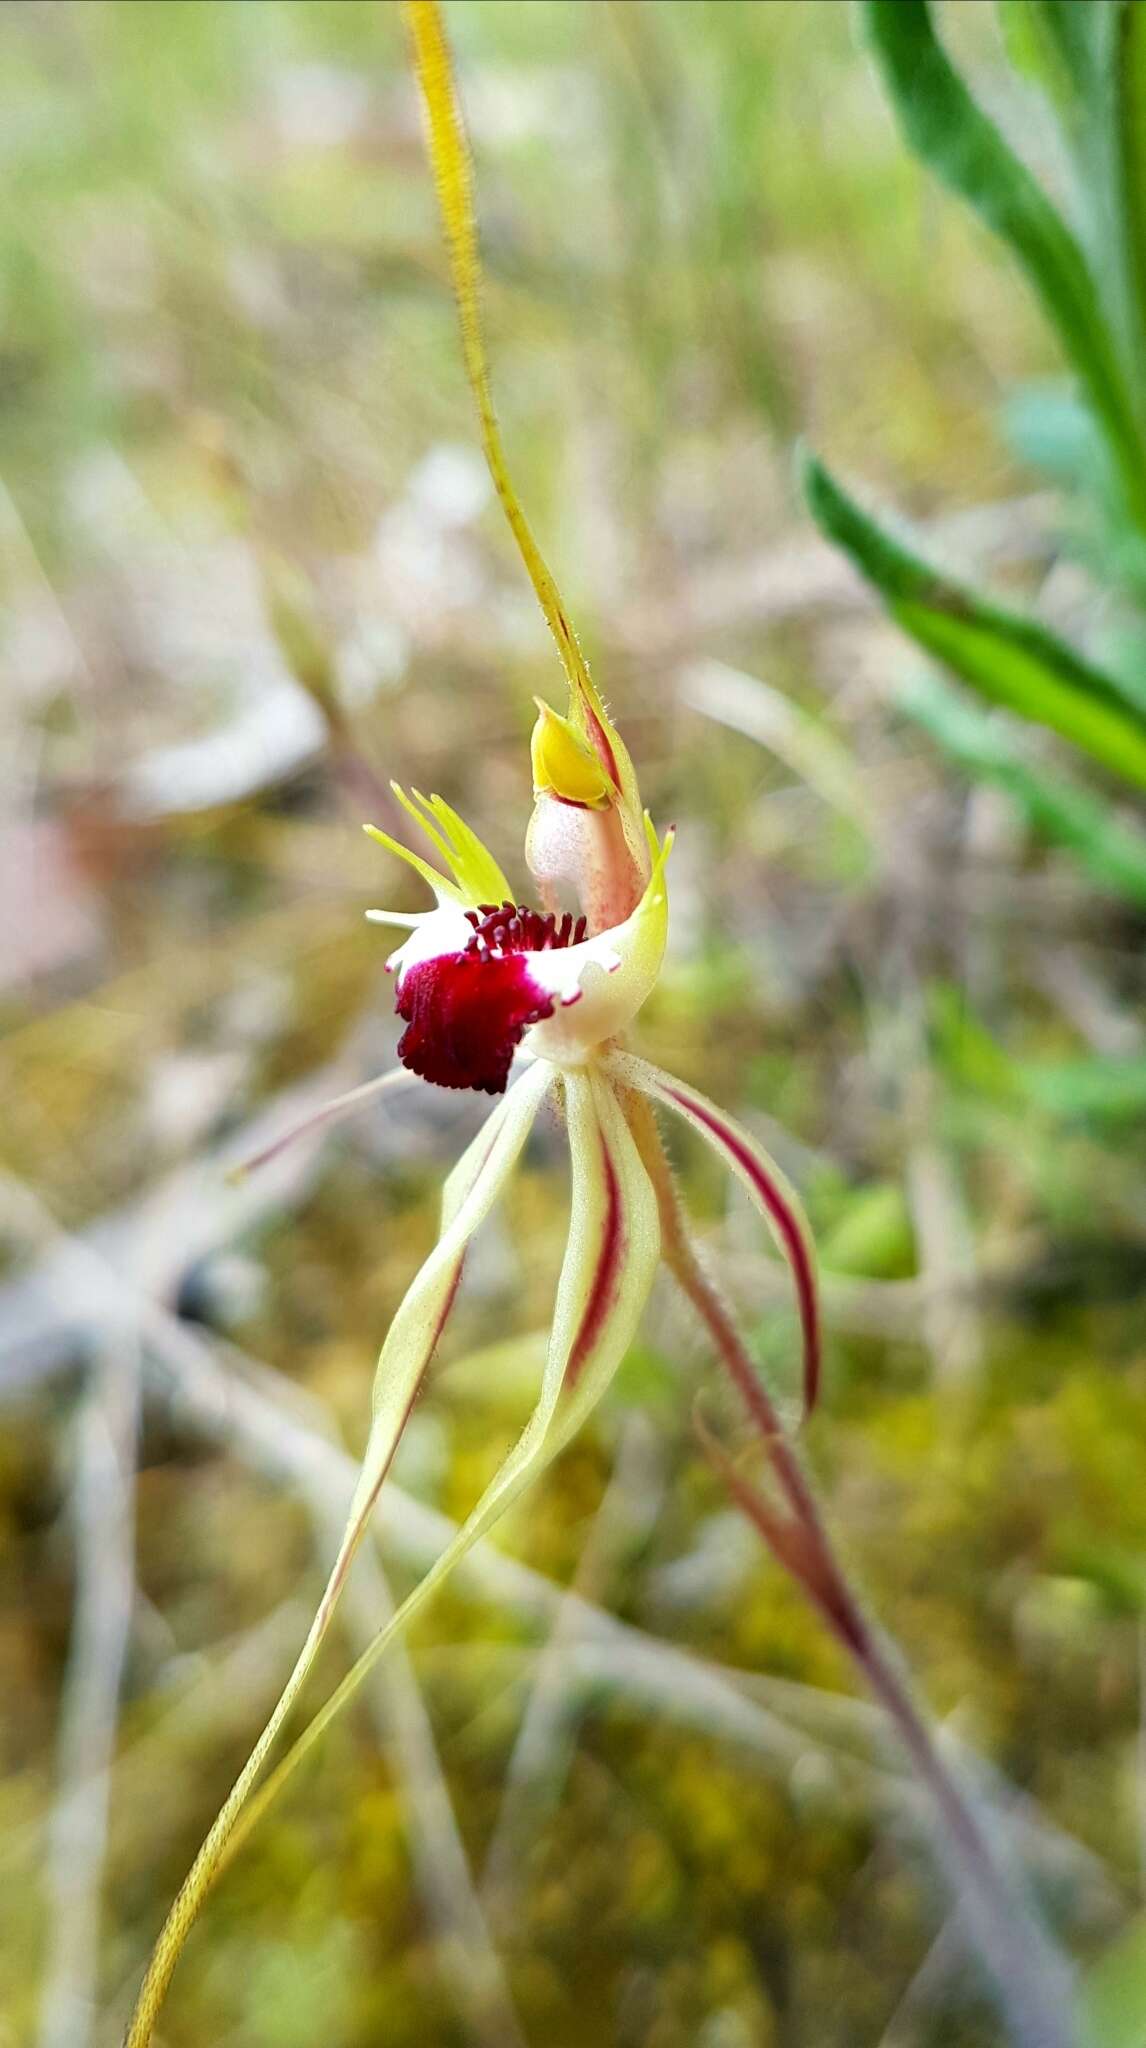 Image of Brown-clubbed spider orchid